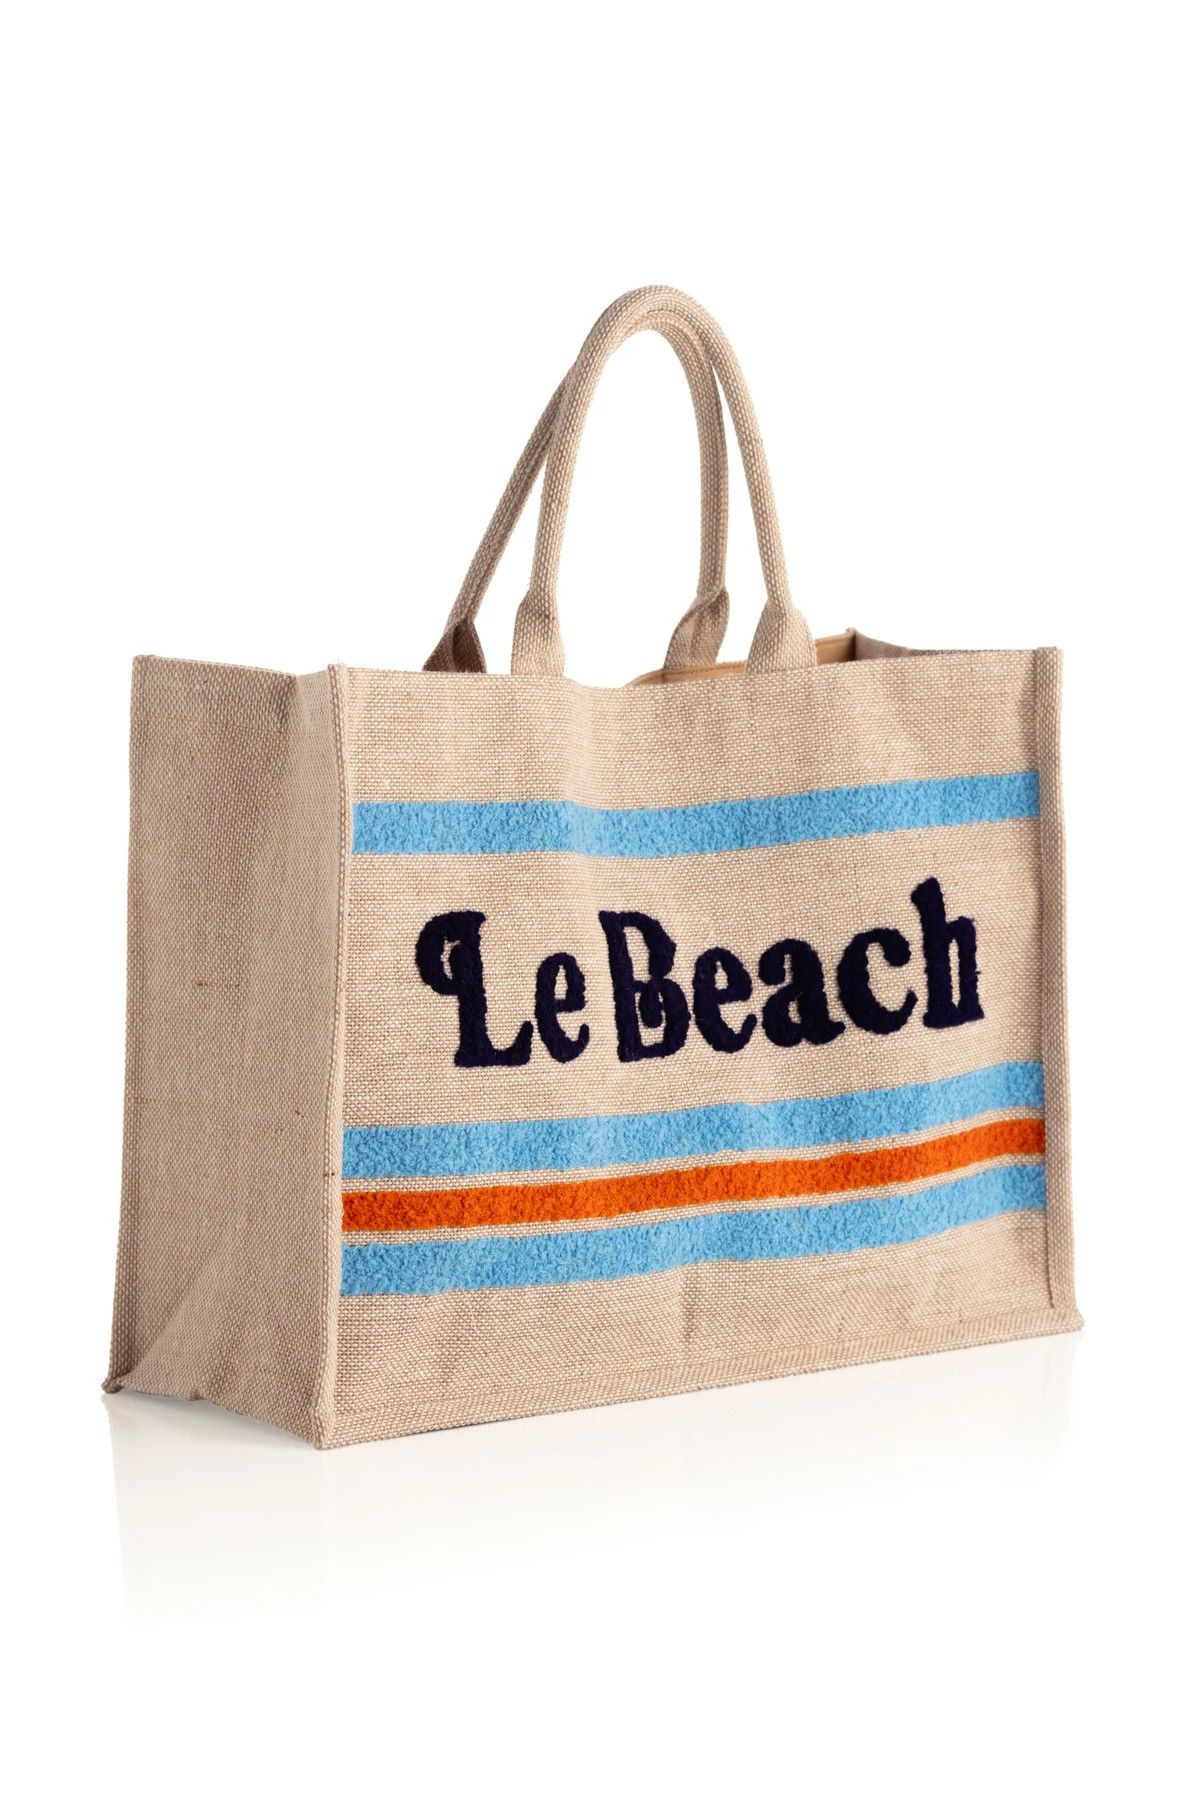 Le Beach Tote | Everything But Water